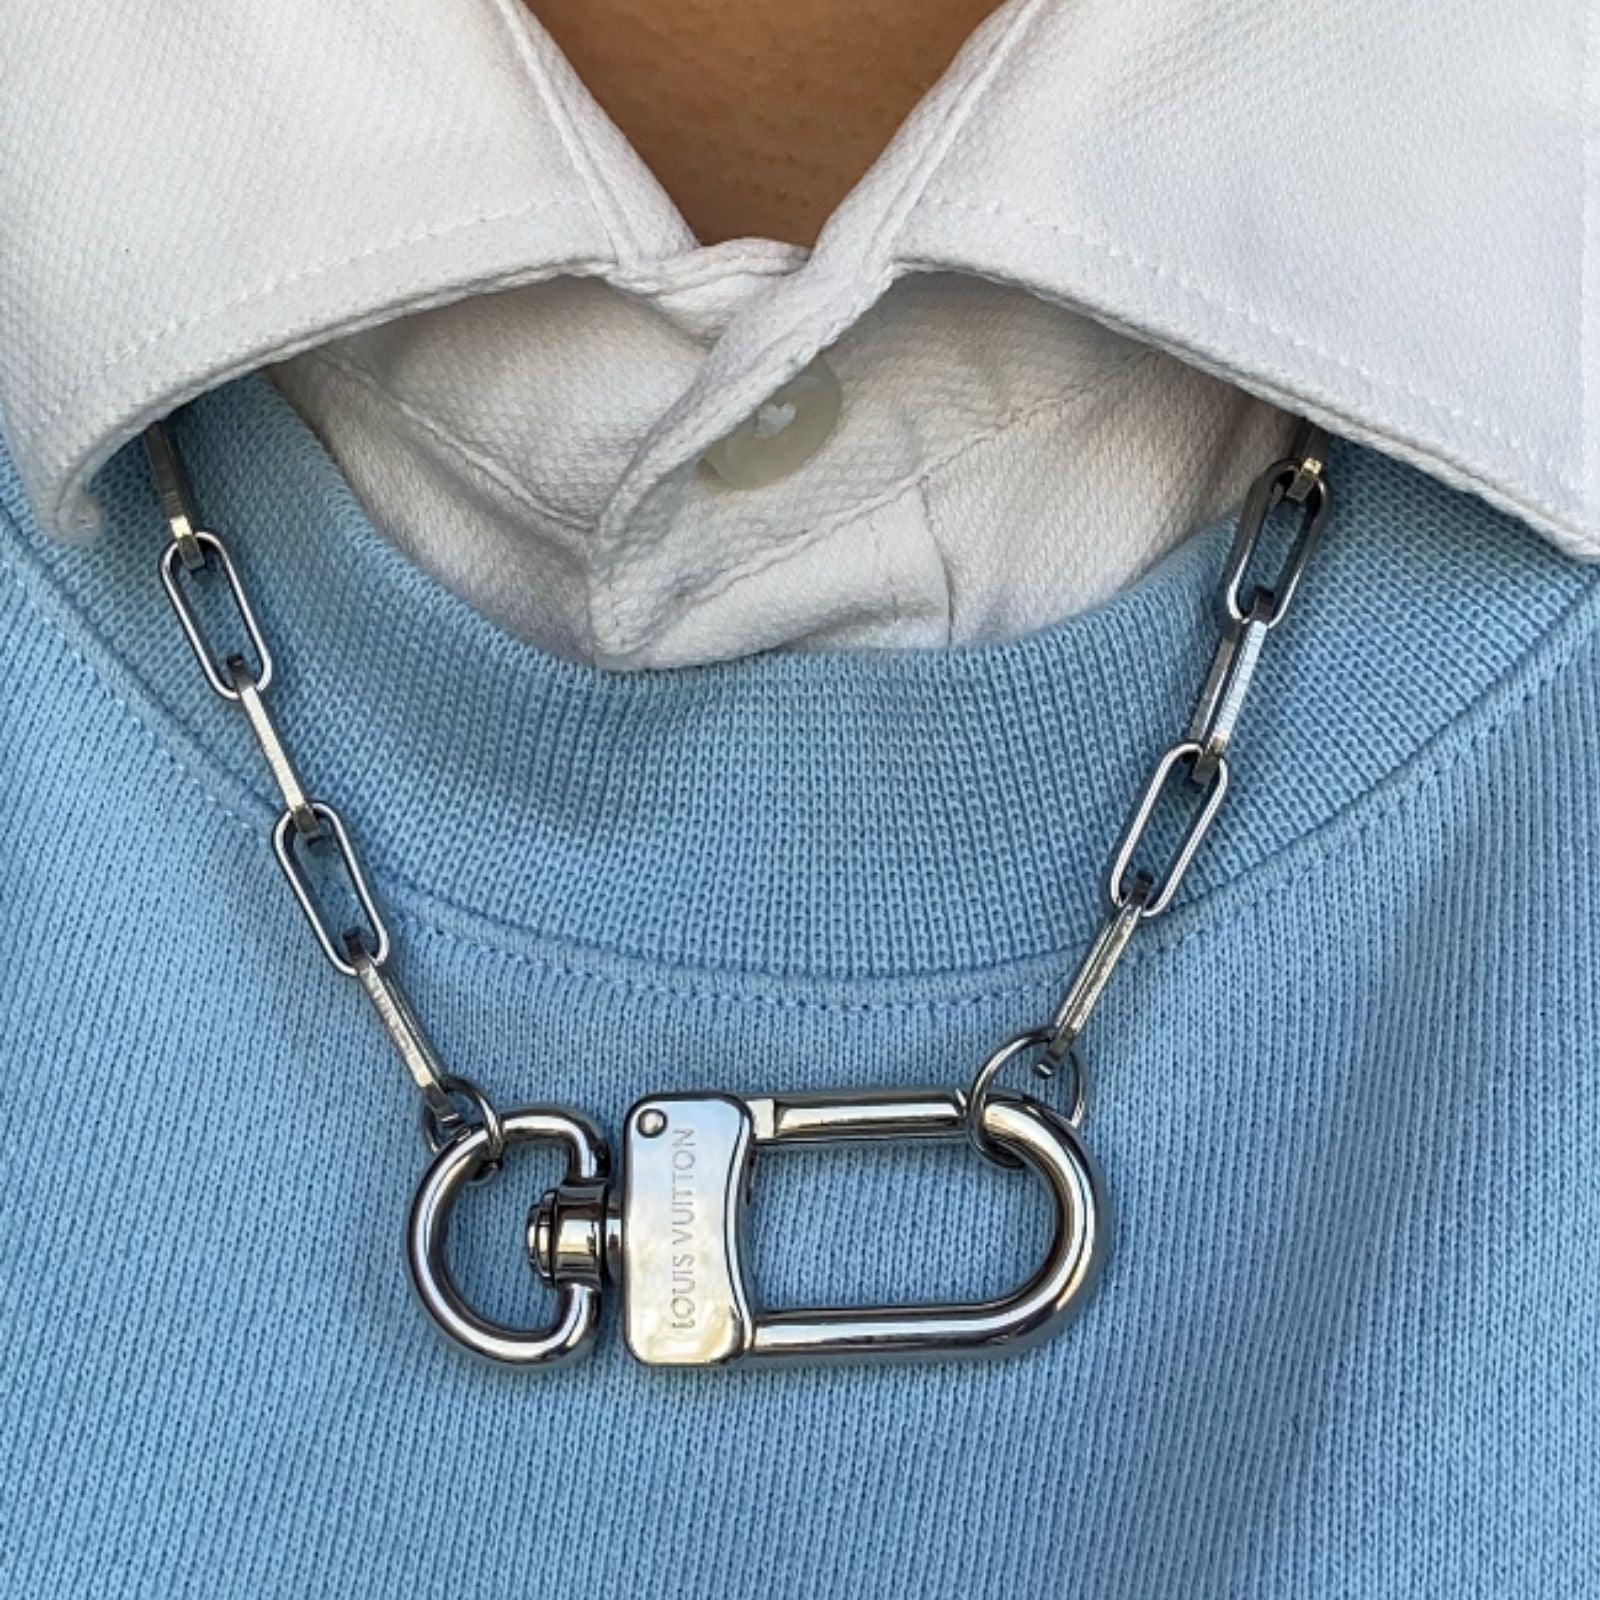 Rework Vintage Silver Louis Vuitton Lock on Necklace with 2